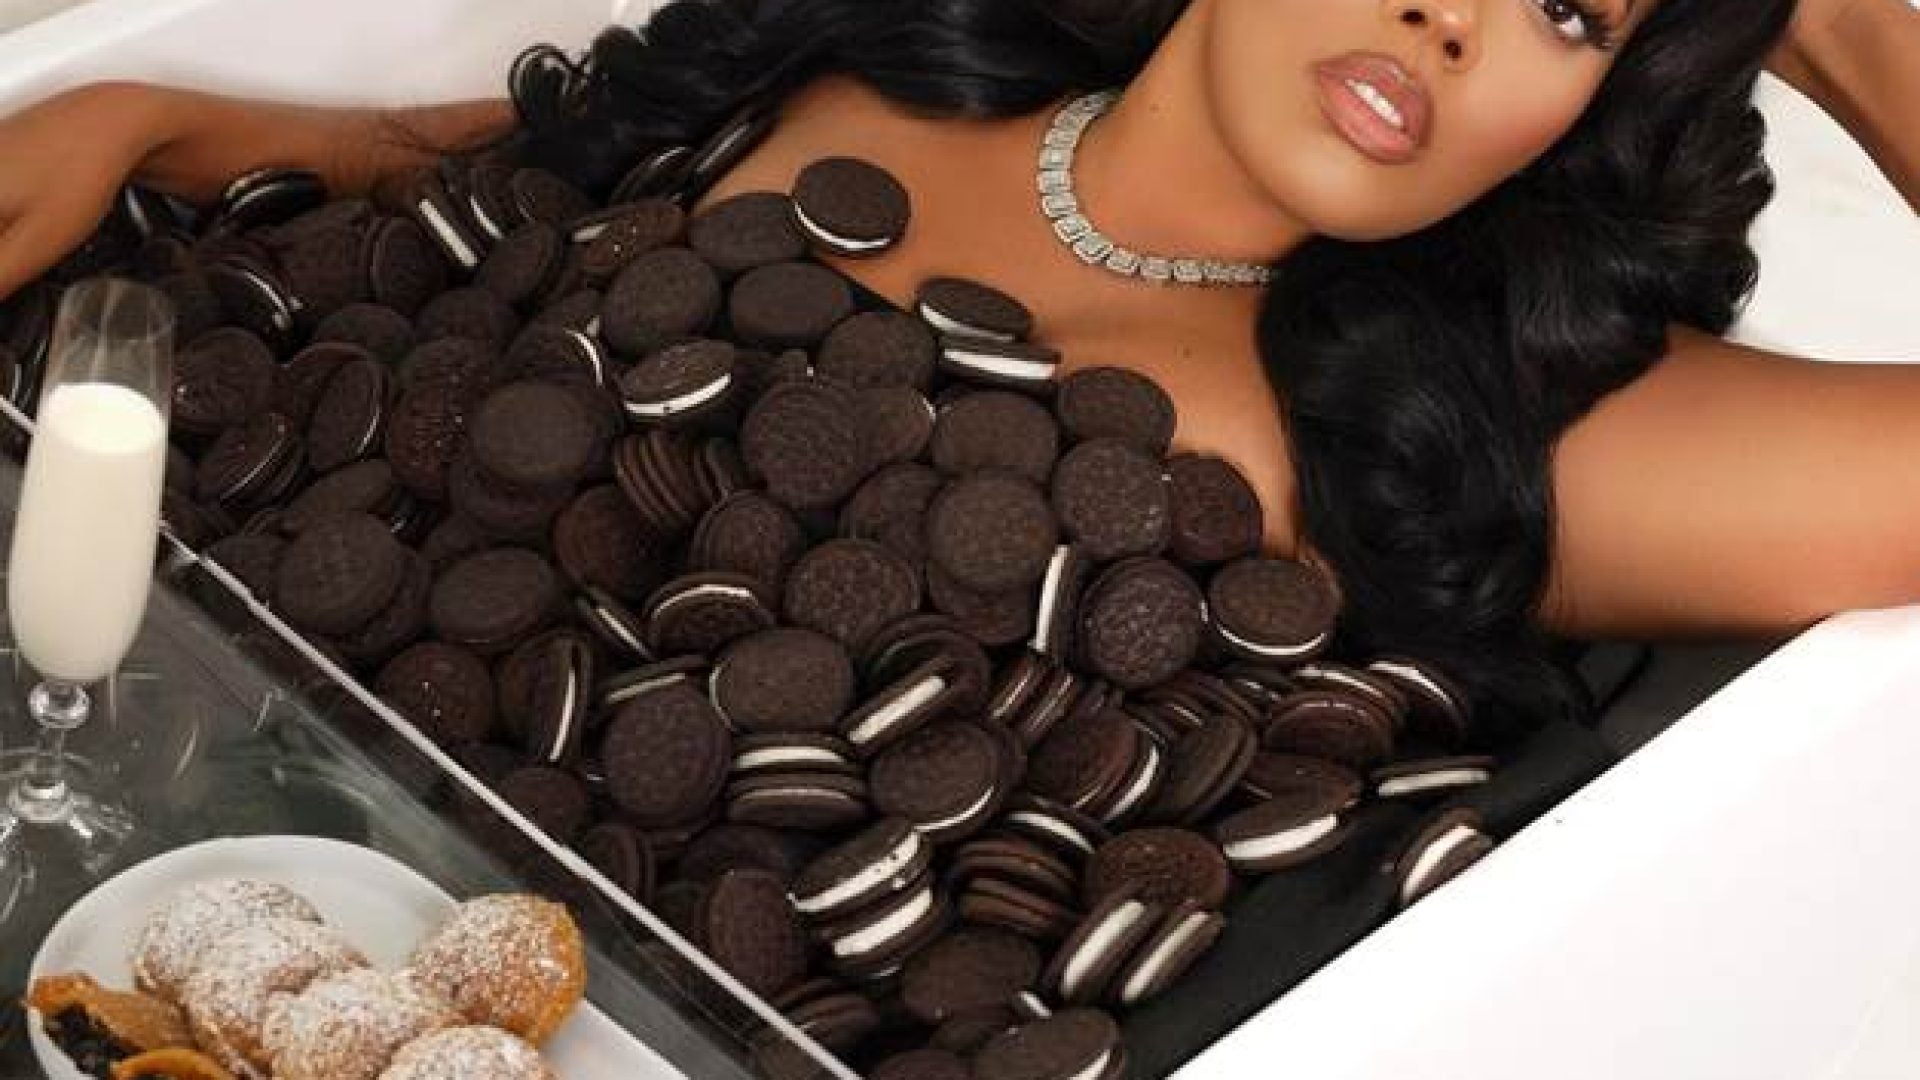 Angela Simmons Partners With Slutty Vegan To Release Plant-Based Fried Oreos